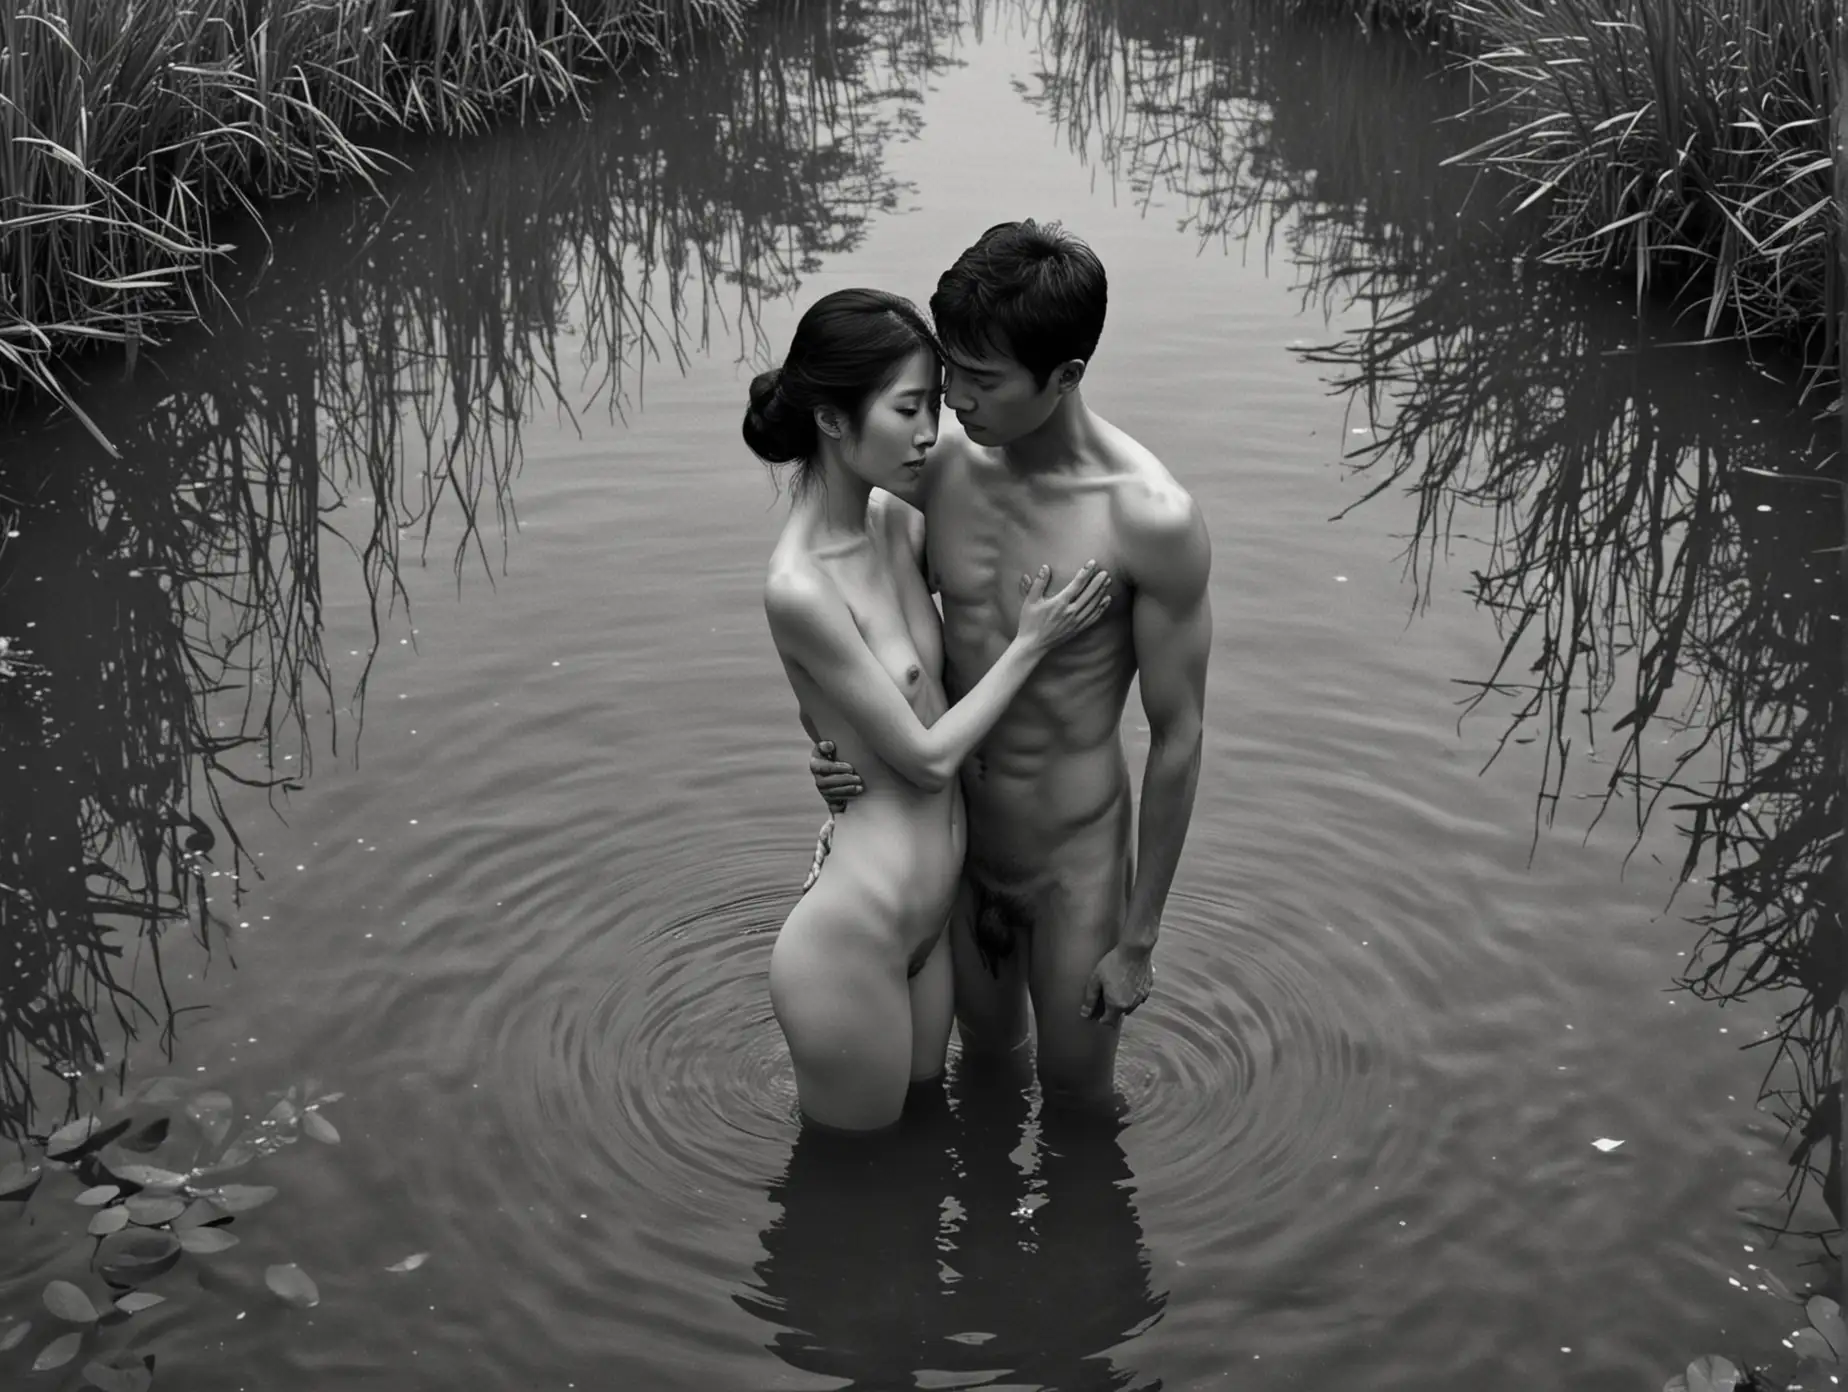 Draw an image of Gao yuanyuan with bare body, embracing her husband in a pond, with shadows or symbolic imagery hinting at darker desires or temptations lurking in the background. This contrast can visually convey the tension between their noble purpose and the temptations they face.